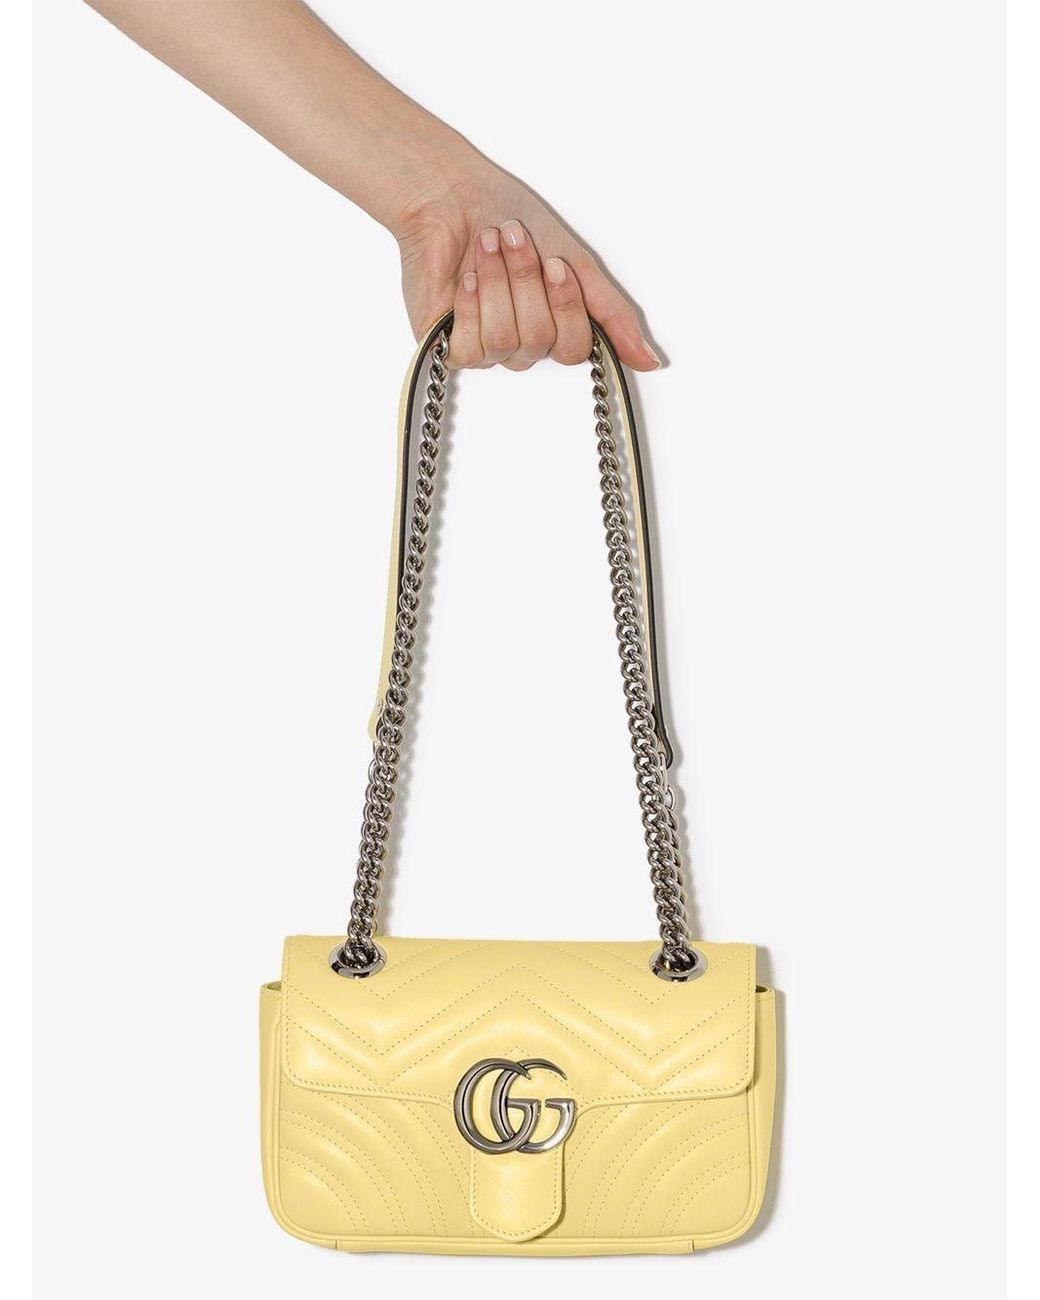 Gucci Small GG Marmont Leather Shoulder Bag in Yellow | Lyst